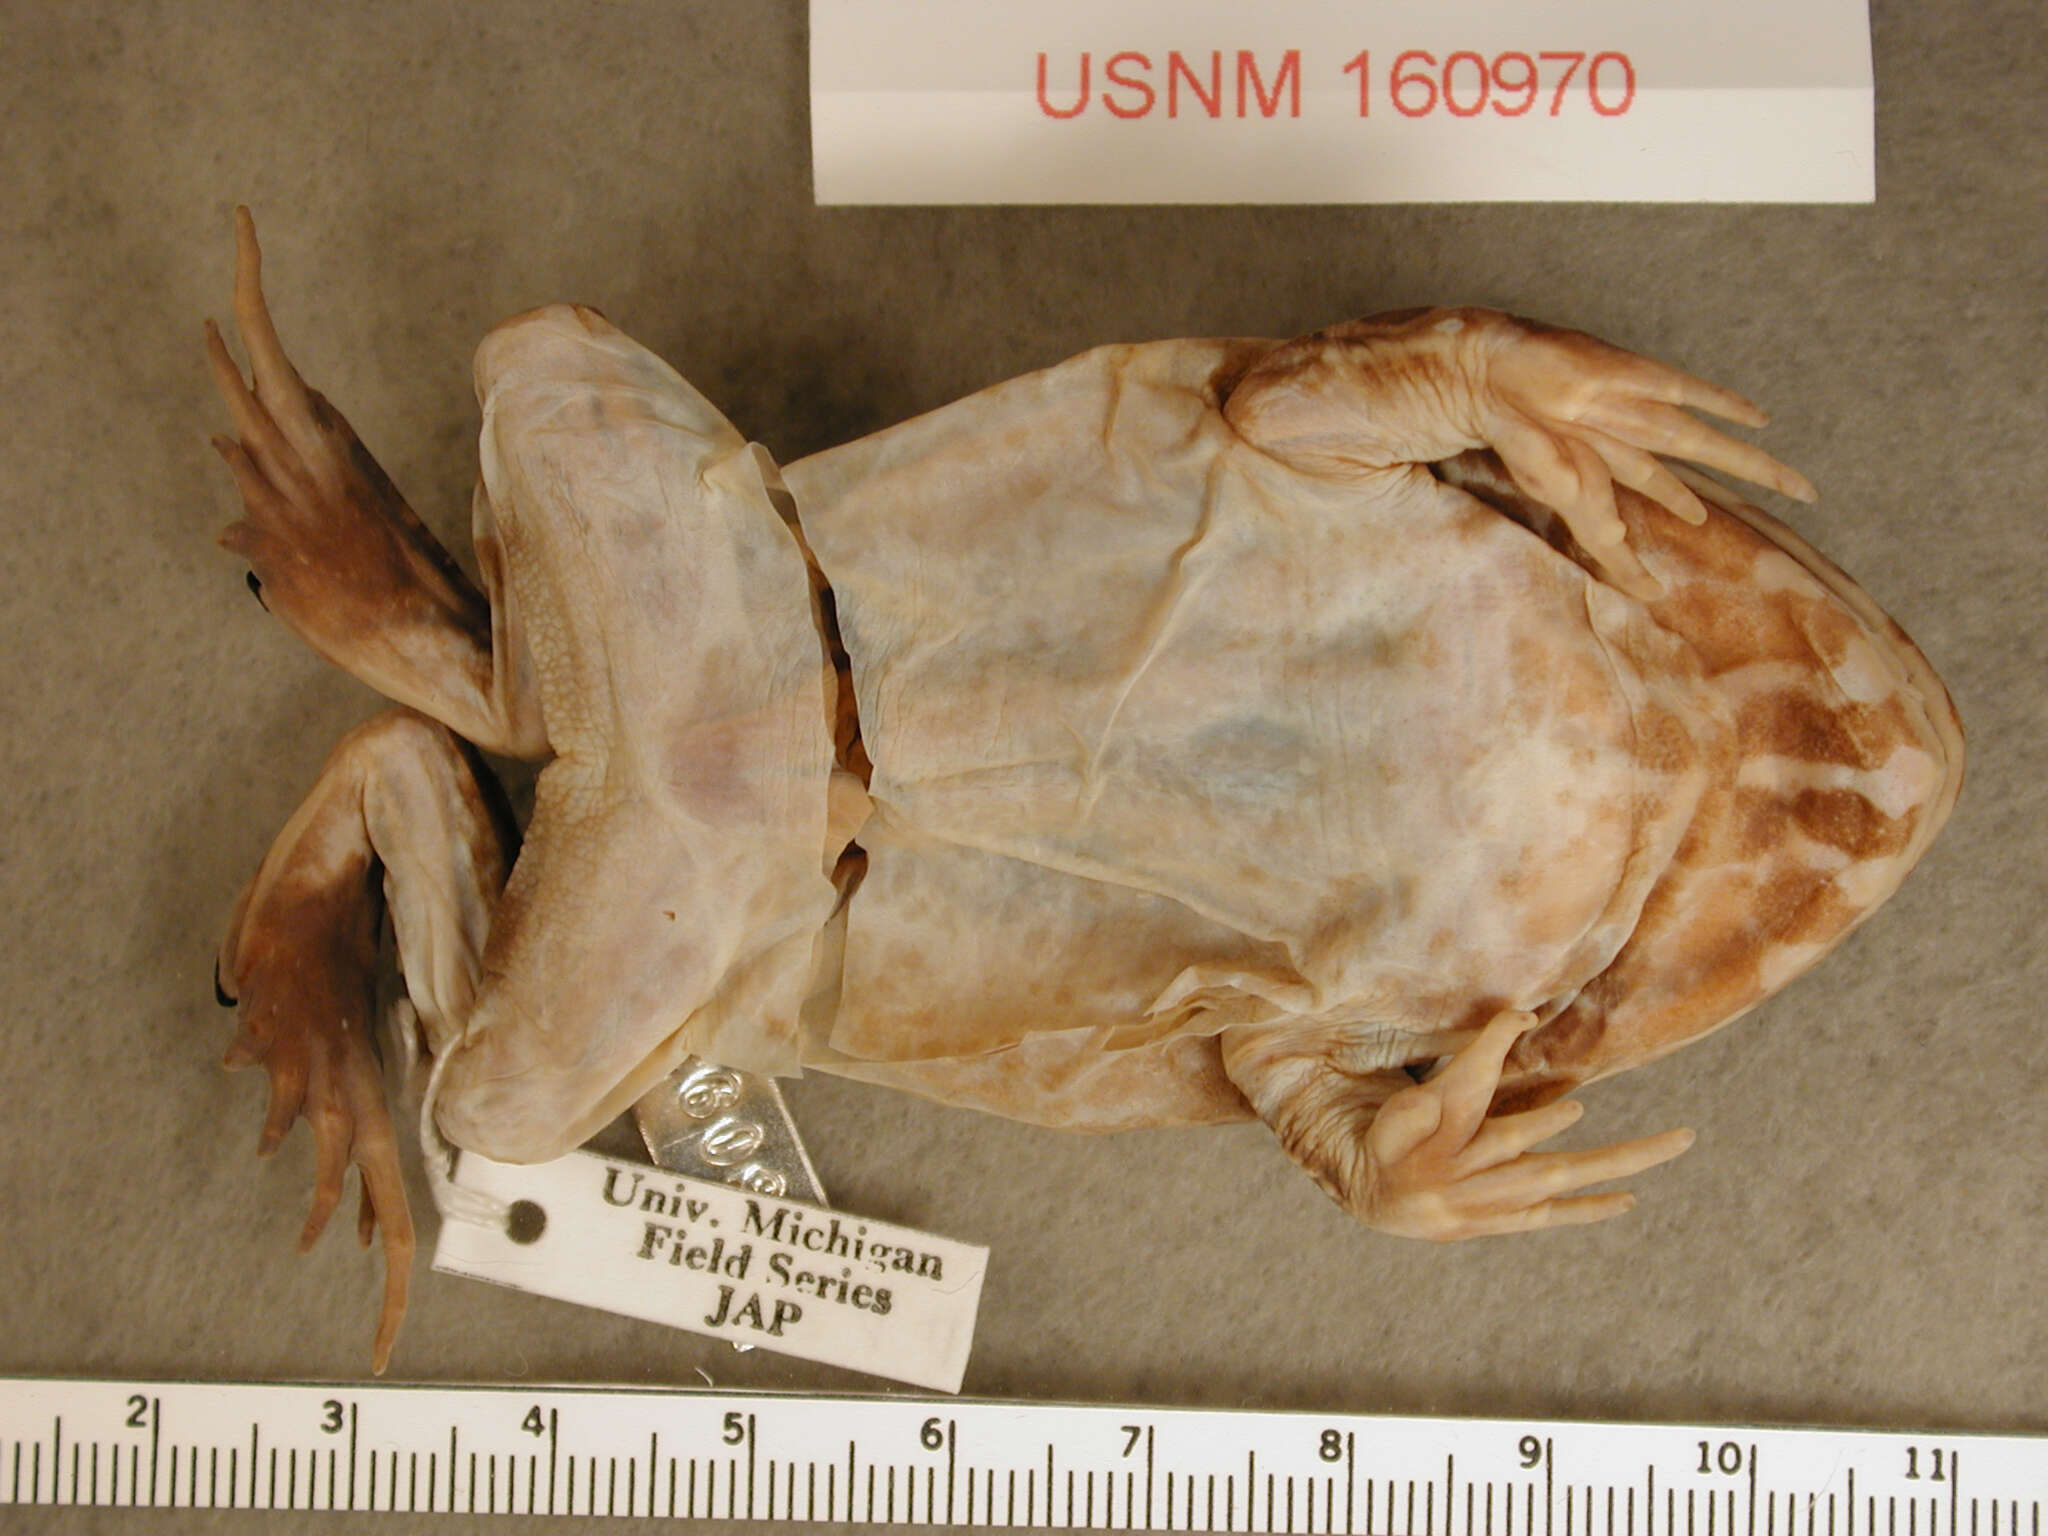 Image of Pacific Big-Mouthed Frog